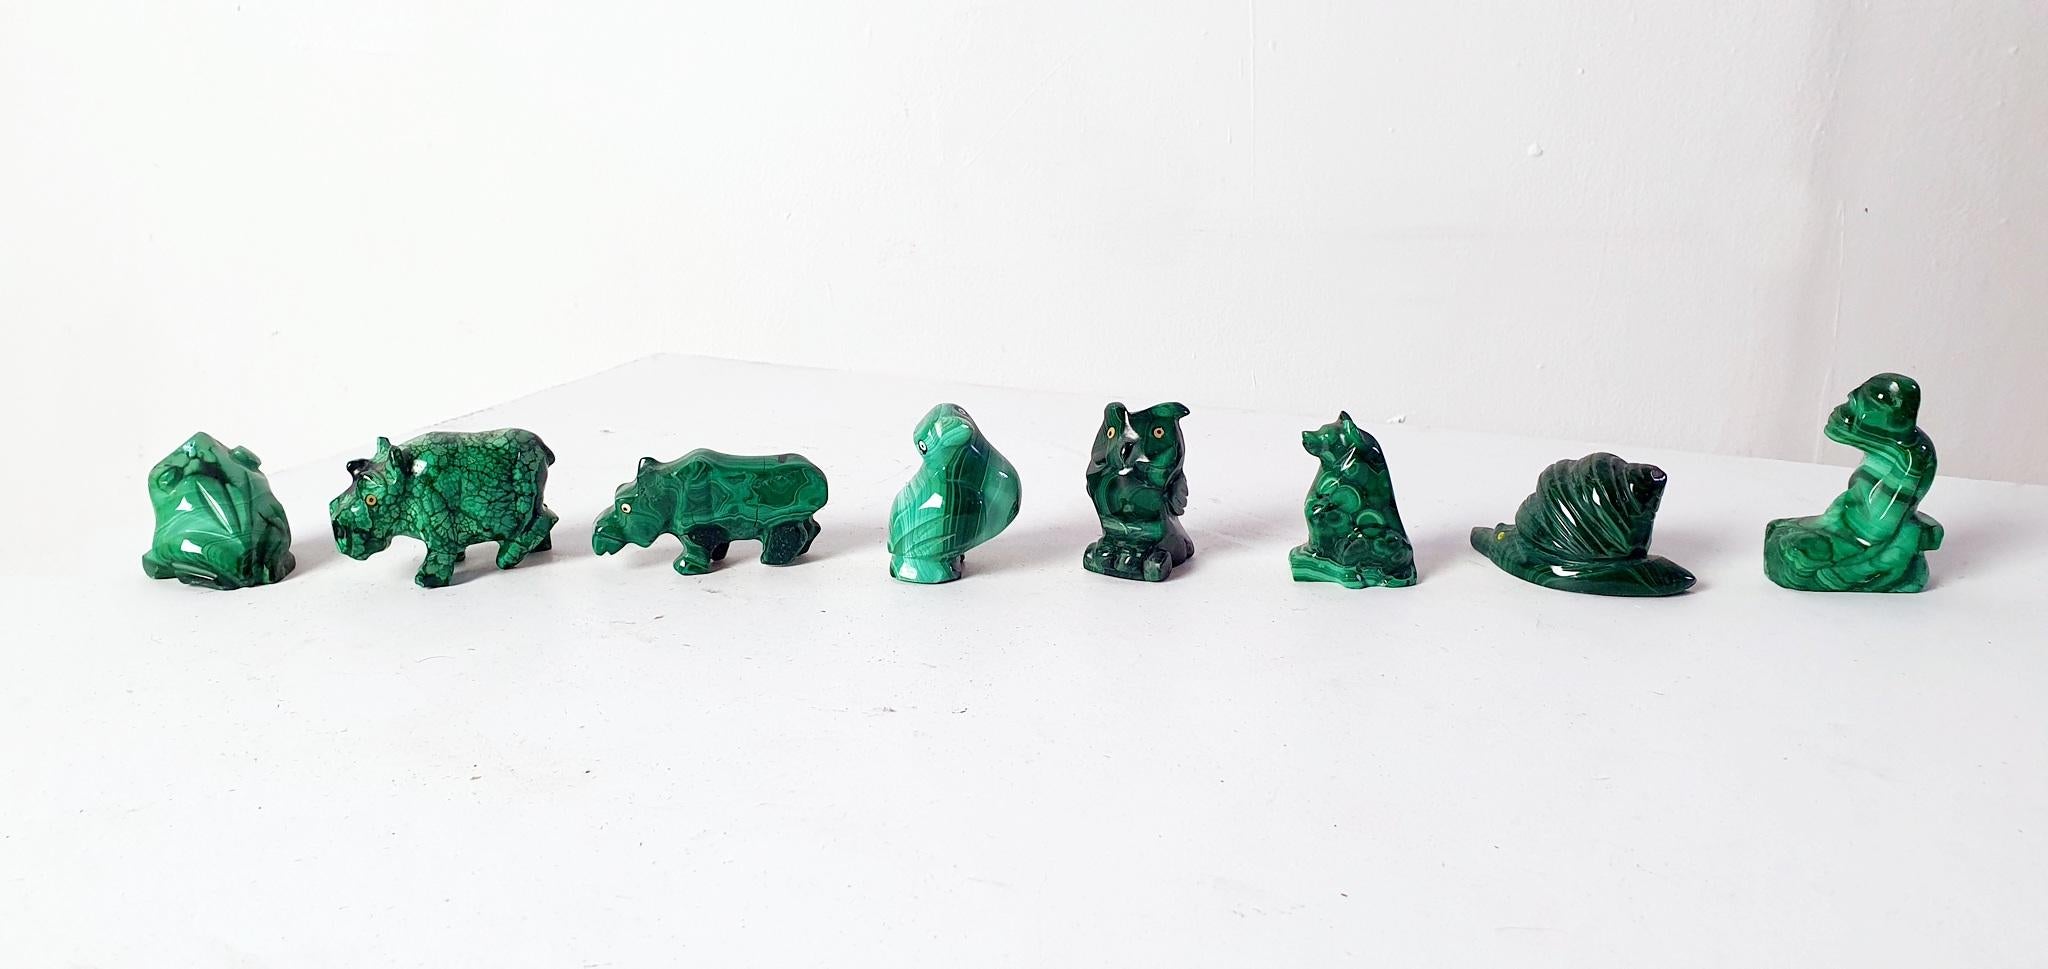 A wonderful set consisting of 17 different animals made from beautiful natural malachite sourced from Congo. All animals are made by hand. The size of the different animals varies. But the crocodile is 15x4.5x3 cm.